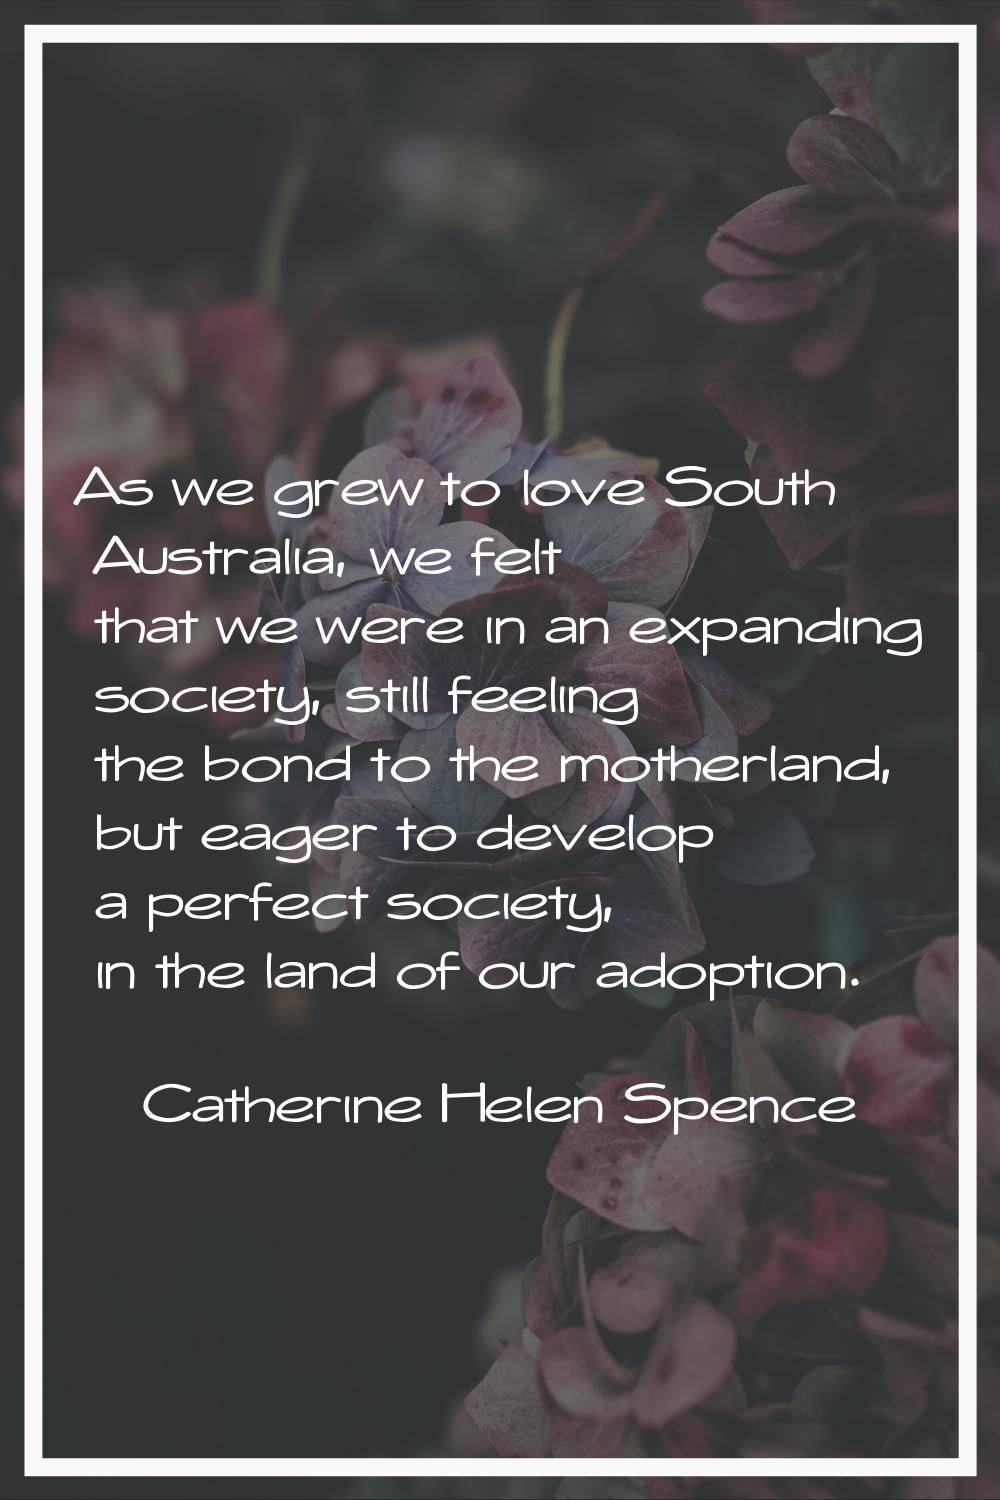 As we grew to love South Australia, we felt that we were in an expanding society, still feeling the